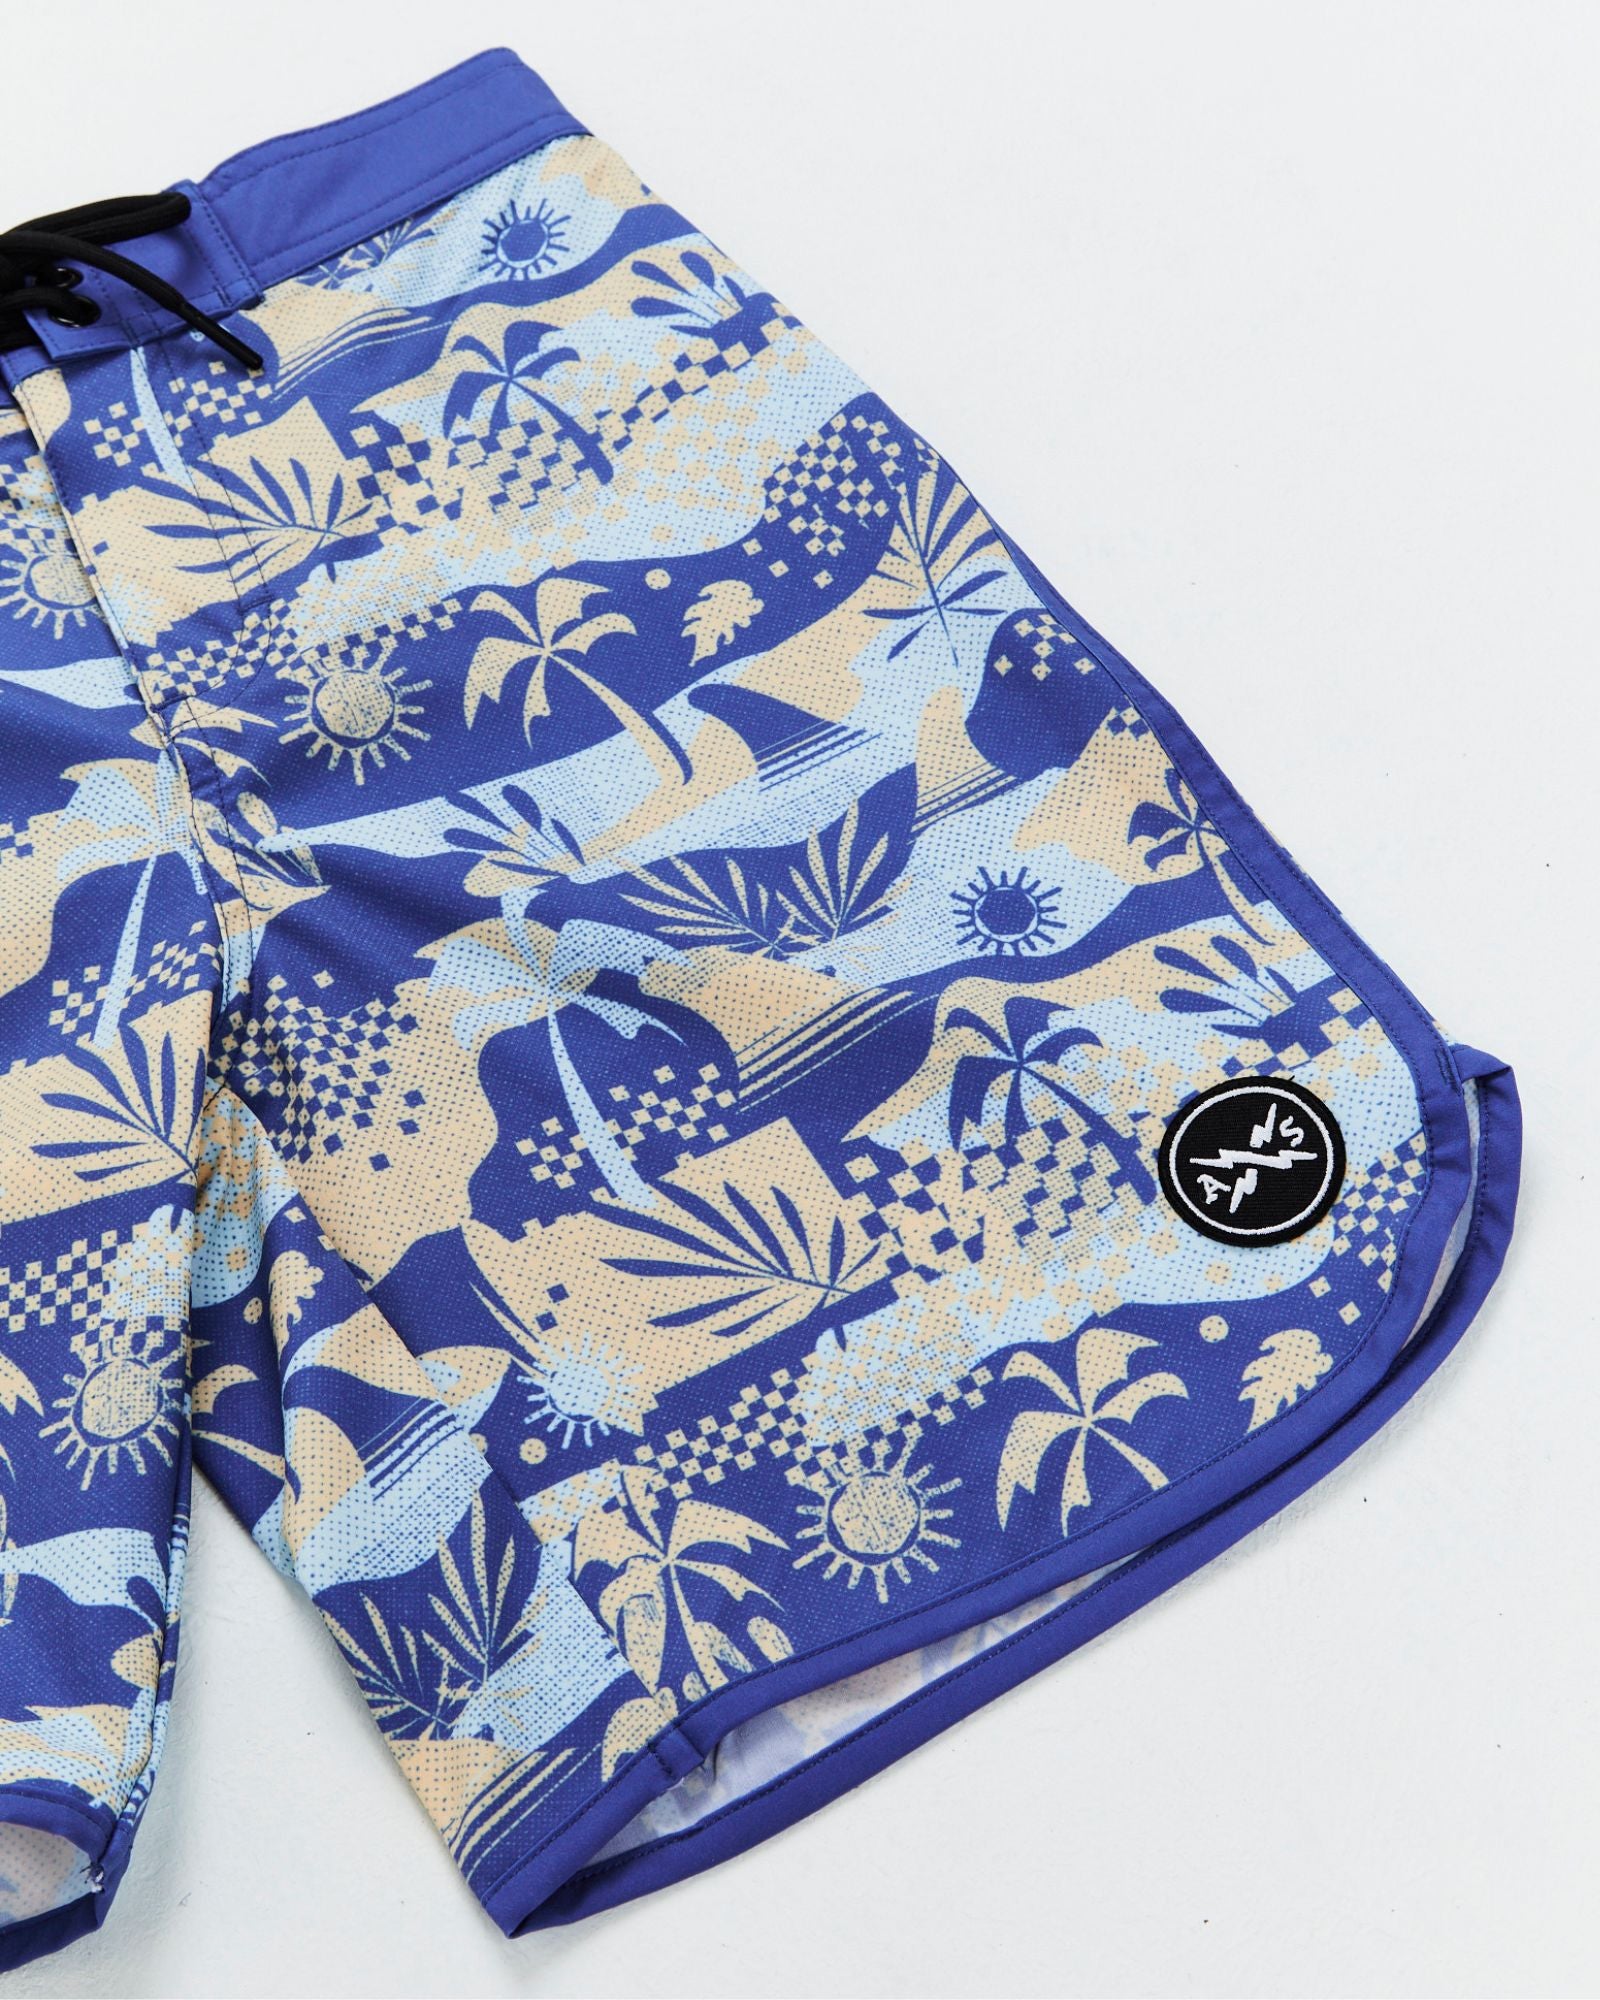 Alphabet Soup's Kids Poolside Boardshorts for boys aged 2-7. All-over tropical print in blues, drawstring waist, 4-way stretch, quick-dry Poly/Elastane blend and Velcro pocket.